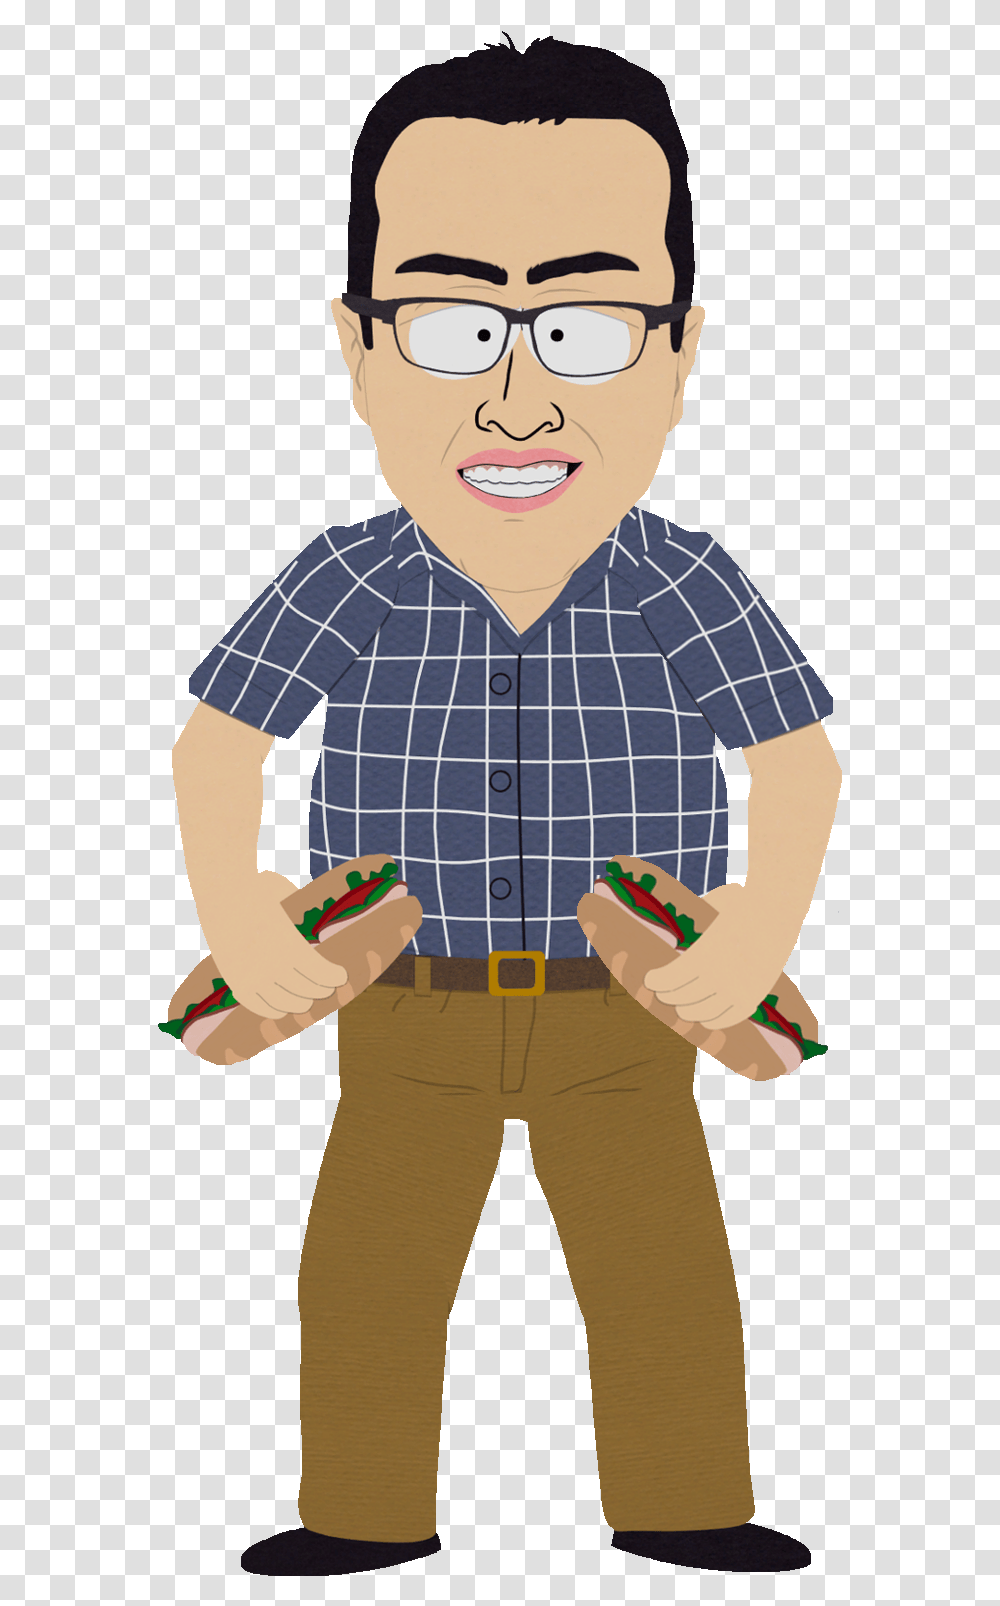 South Park Archives Jared From Subway, Person, Glasses, Accessories Transparent Png